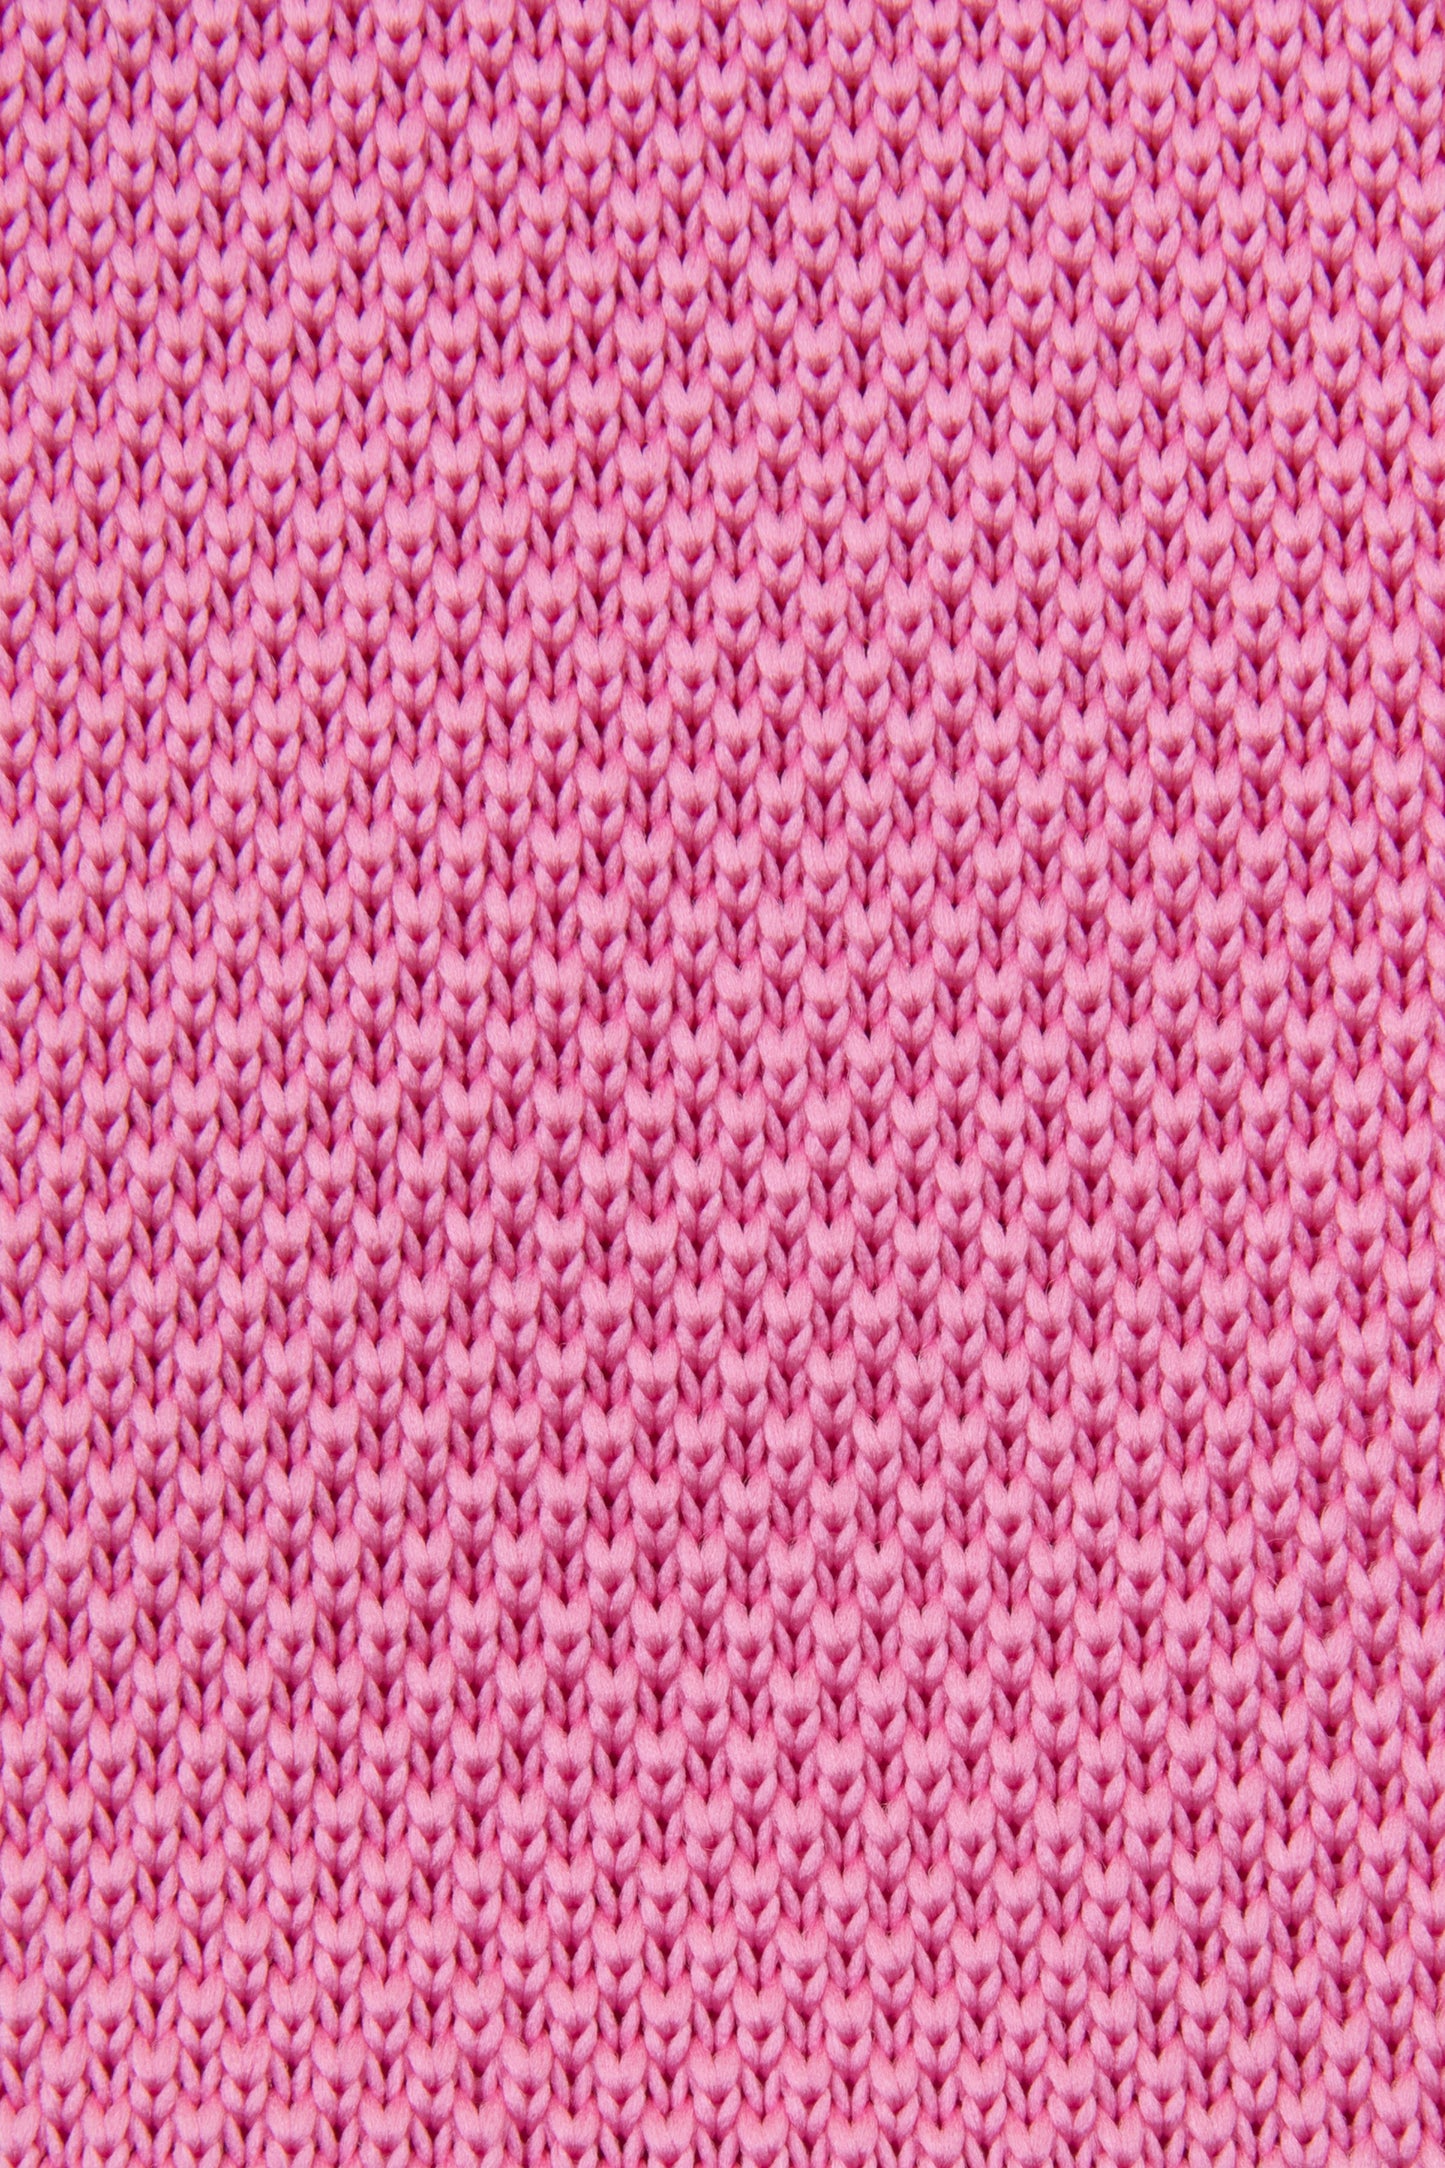 Bright Pink Knitted Tie